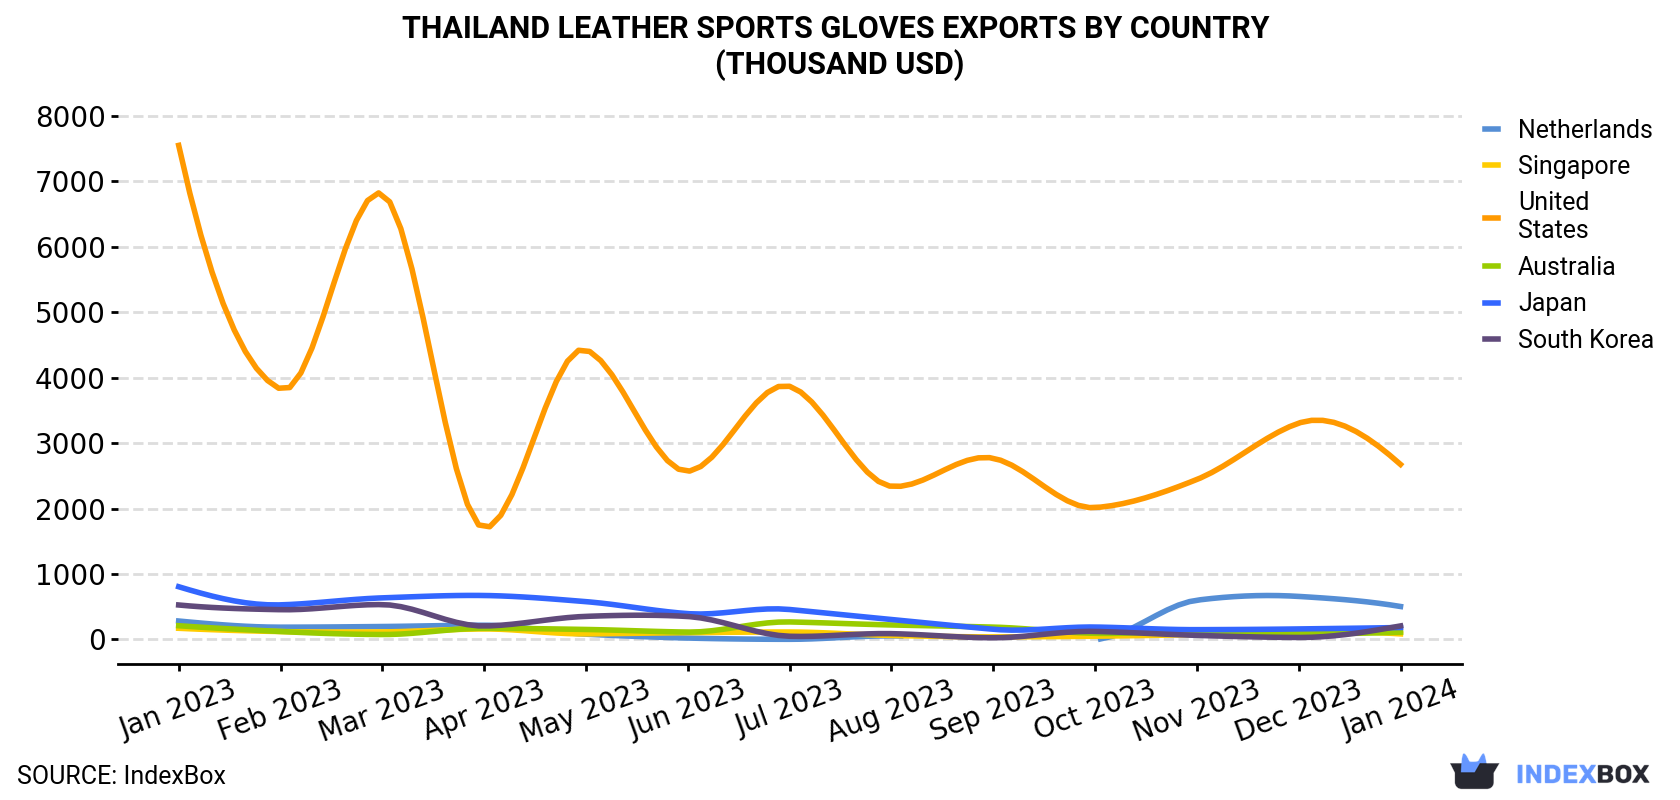 Thailand Leather Sports Gloves Exports By Country (Thousand USD)